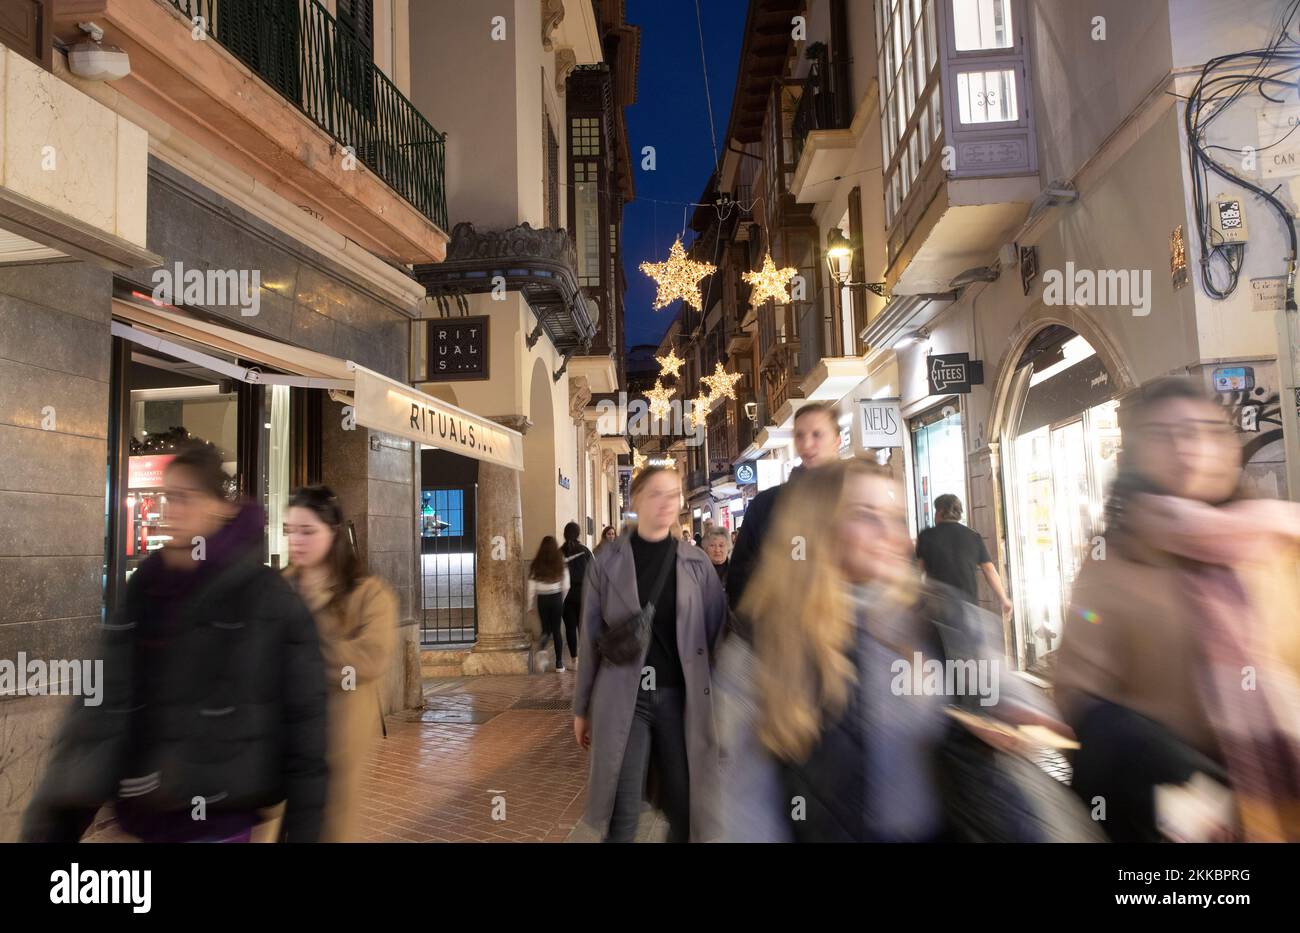 Palma, Spain. 25th Nov, 2022. People walk through a shopping street in  downtown Palma on Mallora on Black Friday. A flood of special offers a few  weeks before Christmas, Black Friday has